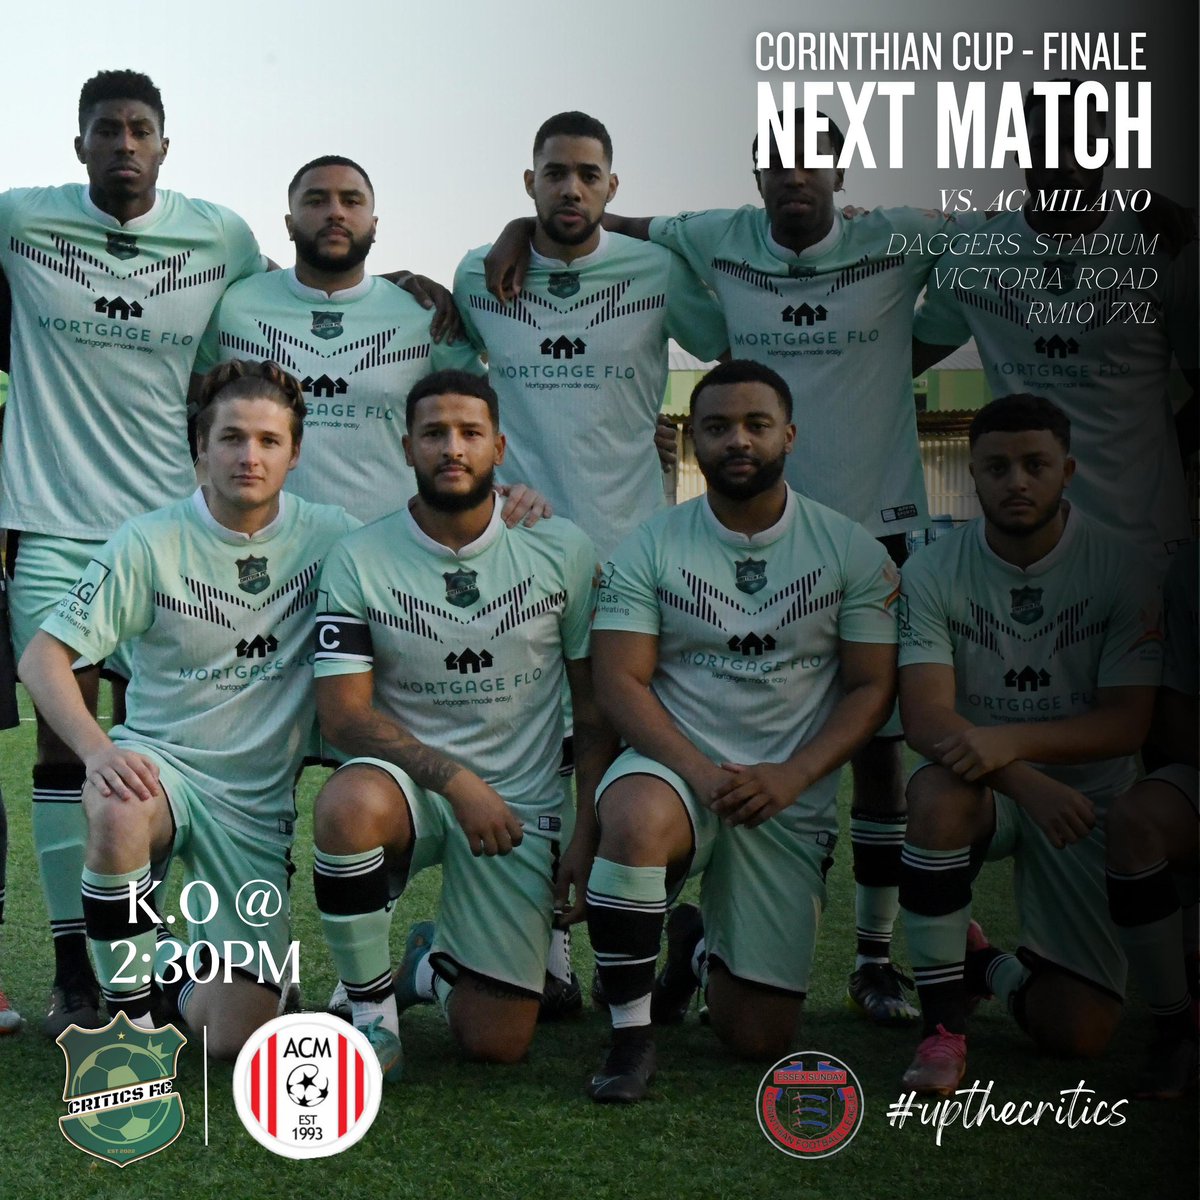 Corinthian Cup Final this Sunday 🤩⚽️🏆 

Our last game of the season gives us a chance to win the @EssexCorinthian cup 🏆

📍 Dagenham & Redbridge Stadium 🏟️ 

⏰ 2:30pm KO

Come support the Critics Family 💚🟢

#football #critics #sundayleague #trophies #cupfinal #final #family